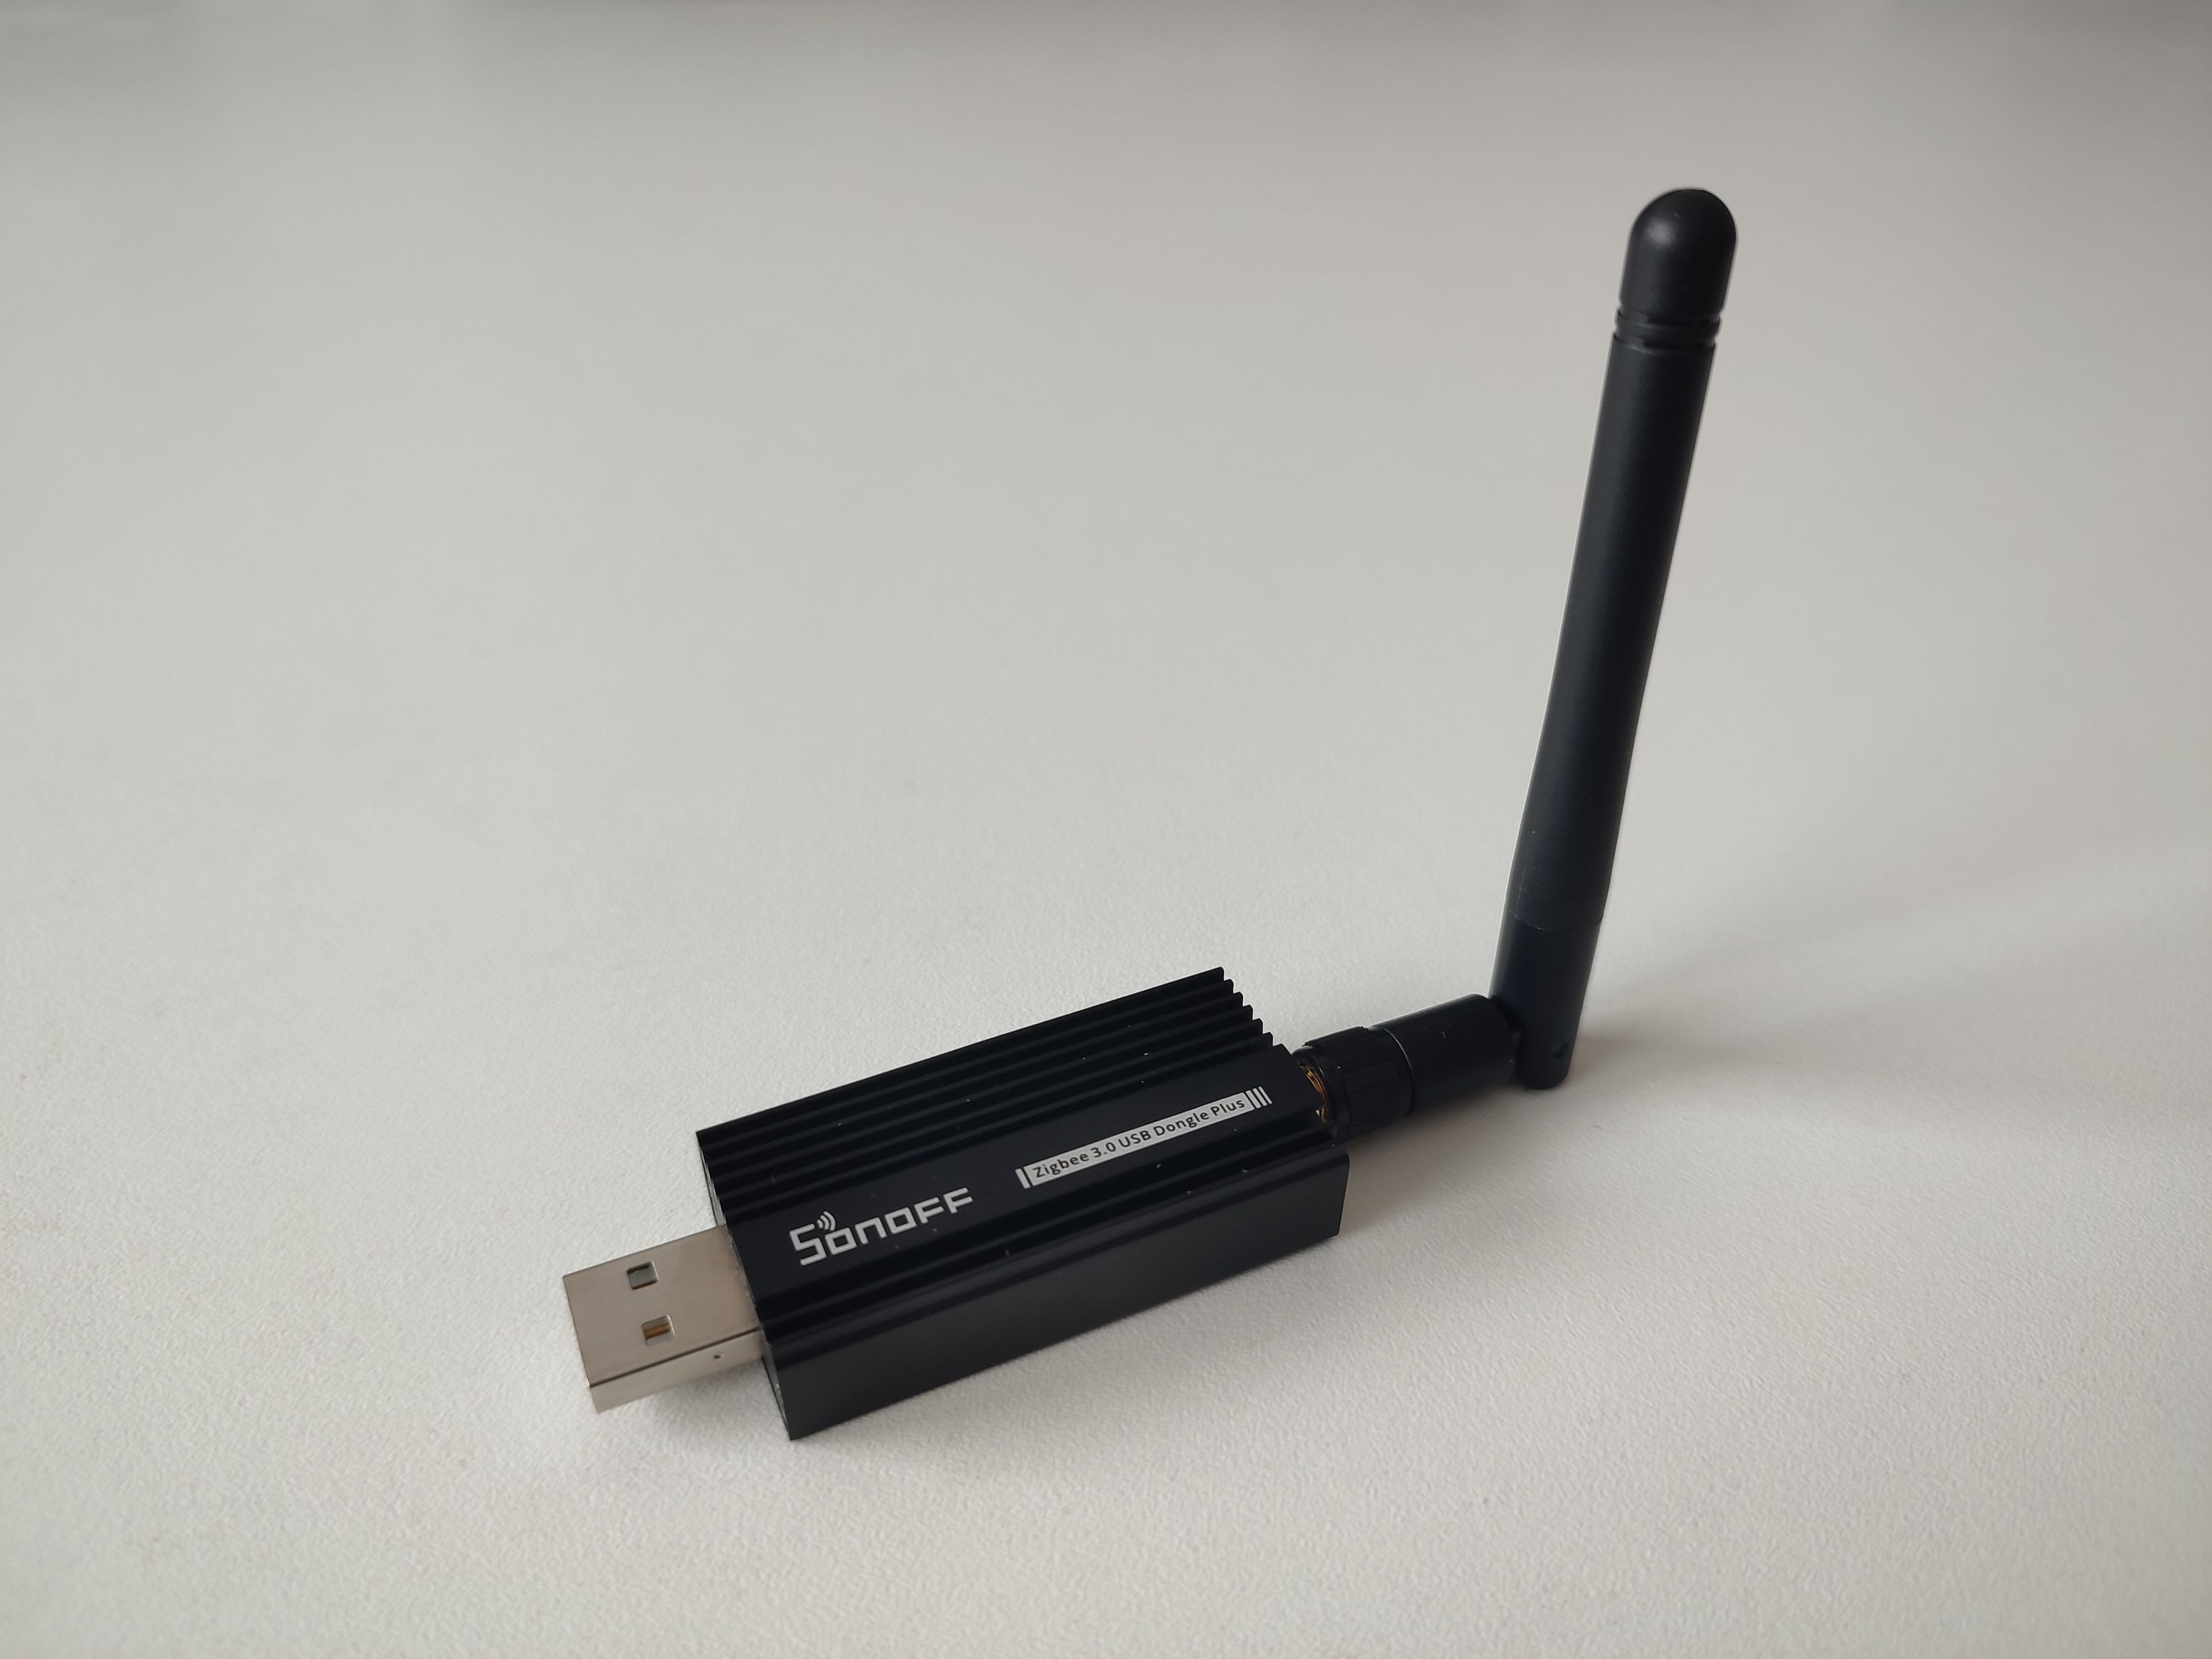 Sonoff ZBDongle-E USB Stick with antenna